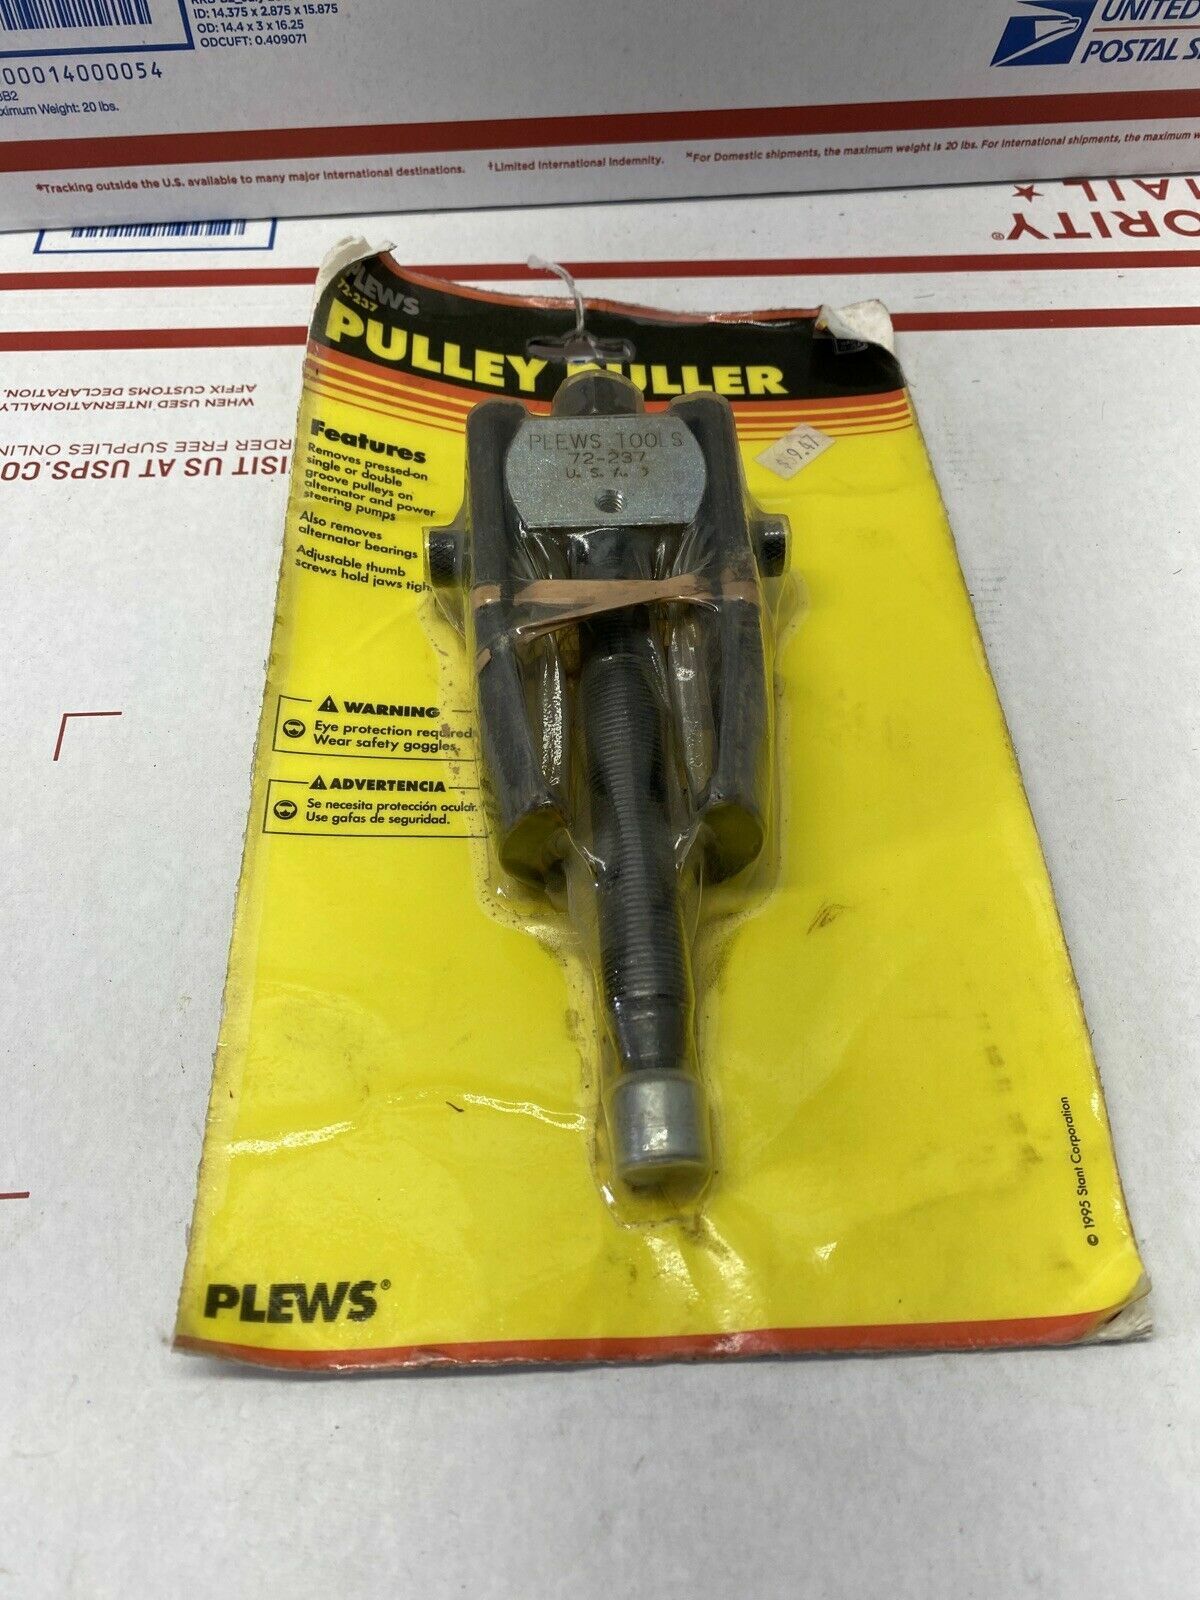 Plews 72-237 Pulley Puller Made in USA